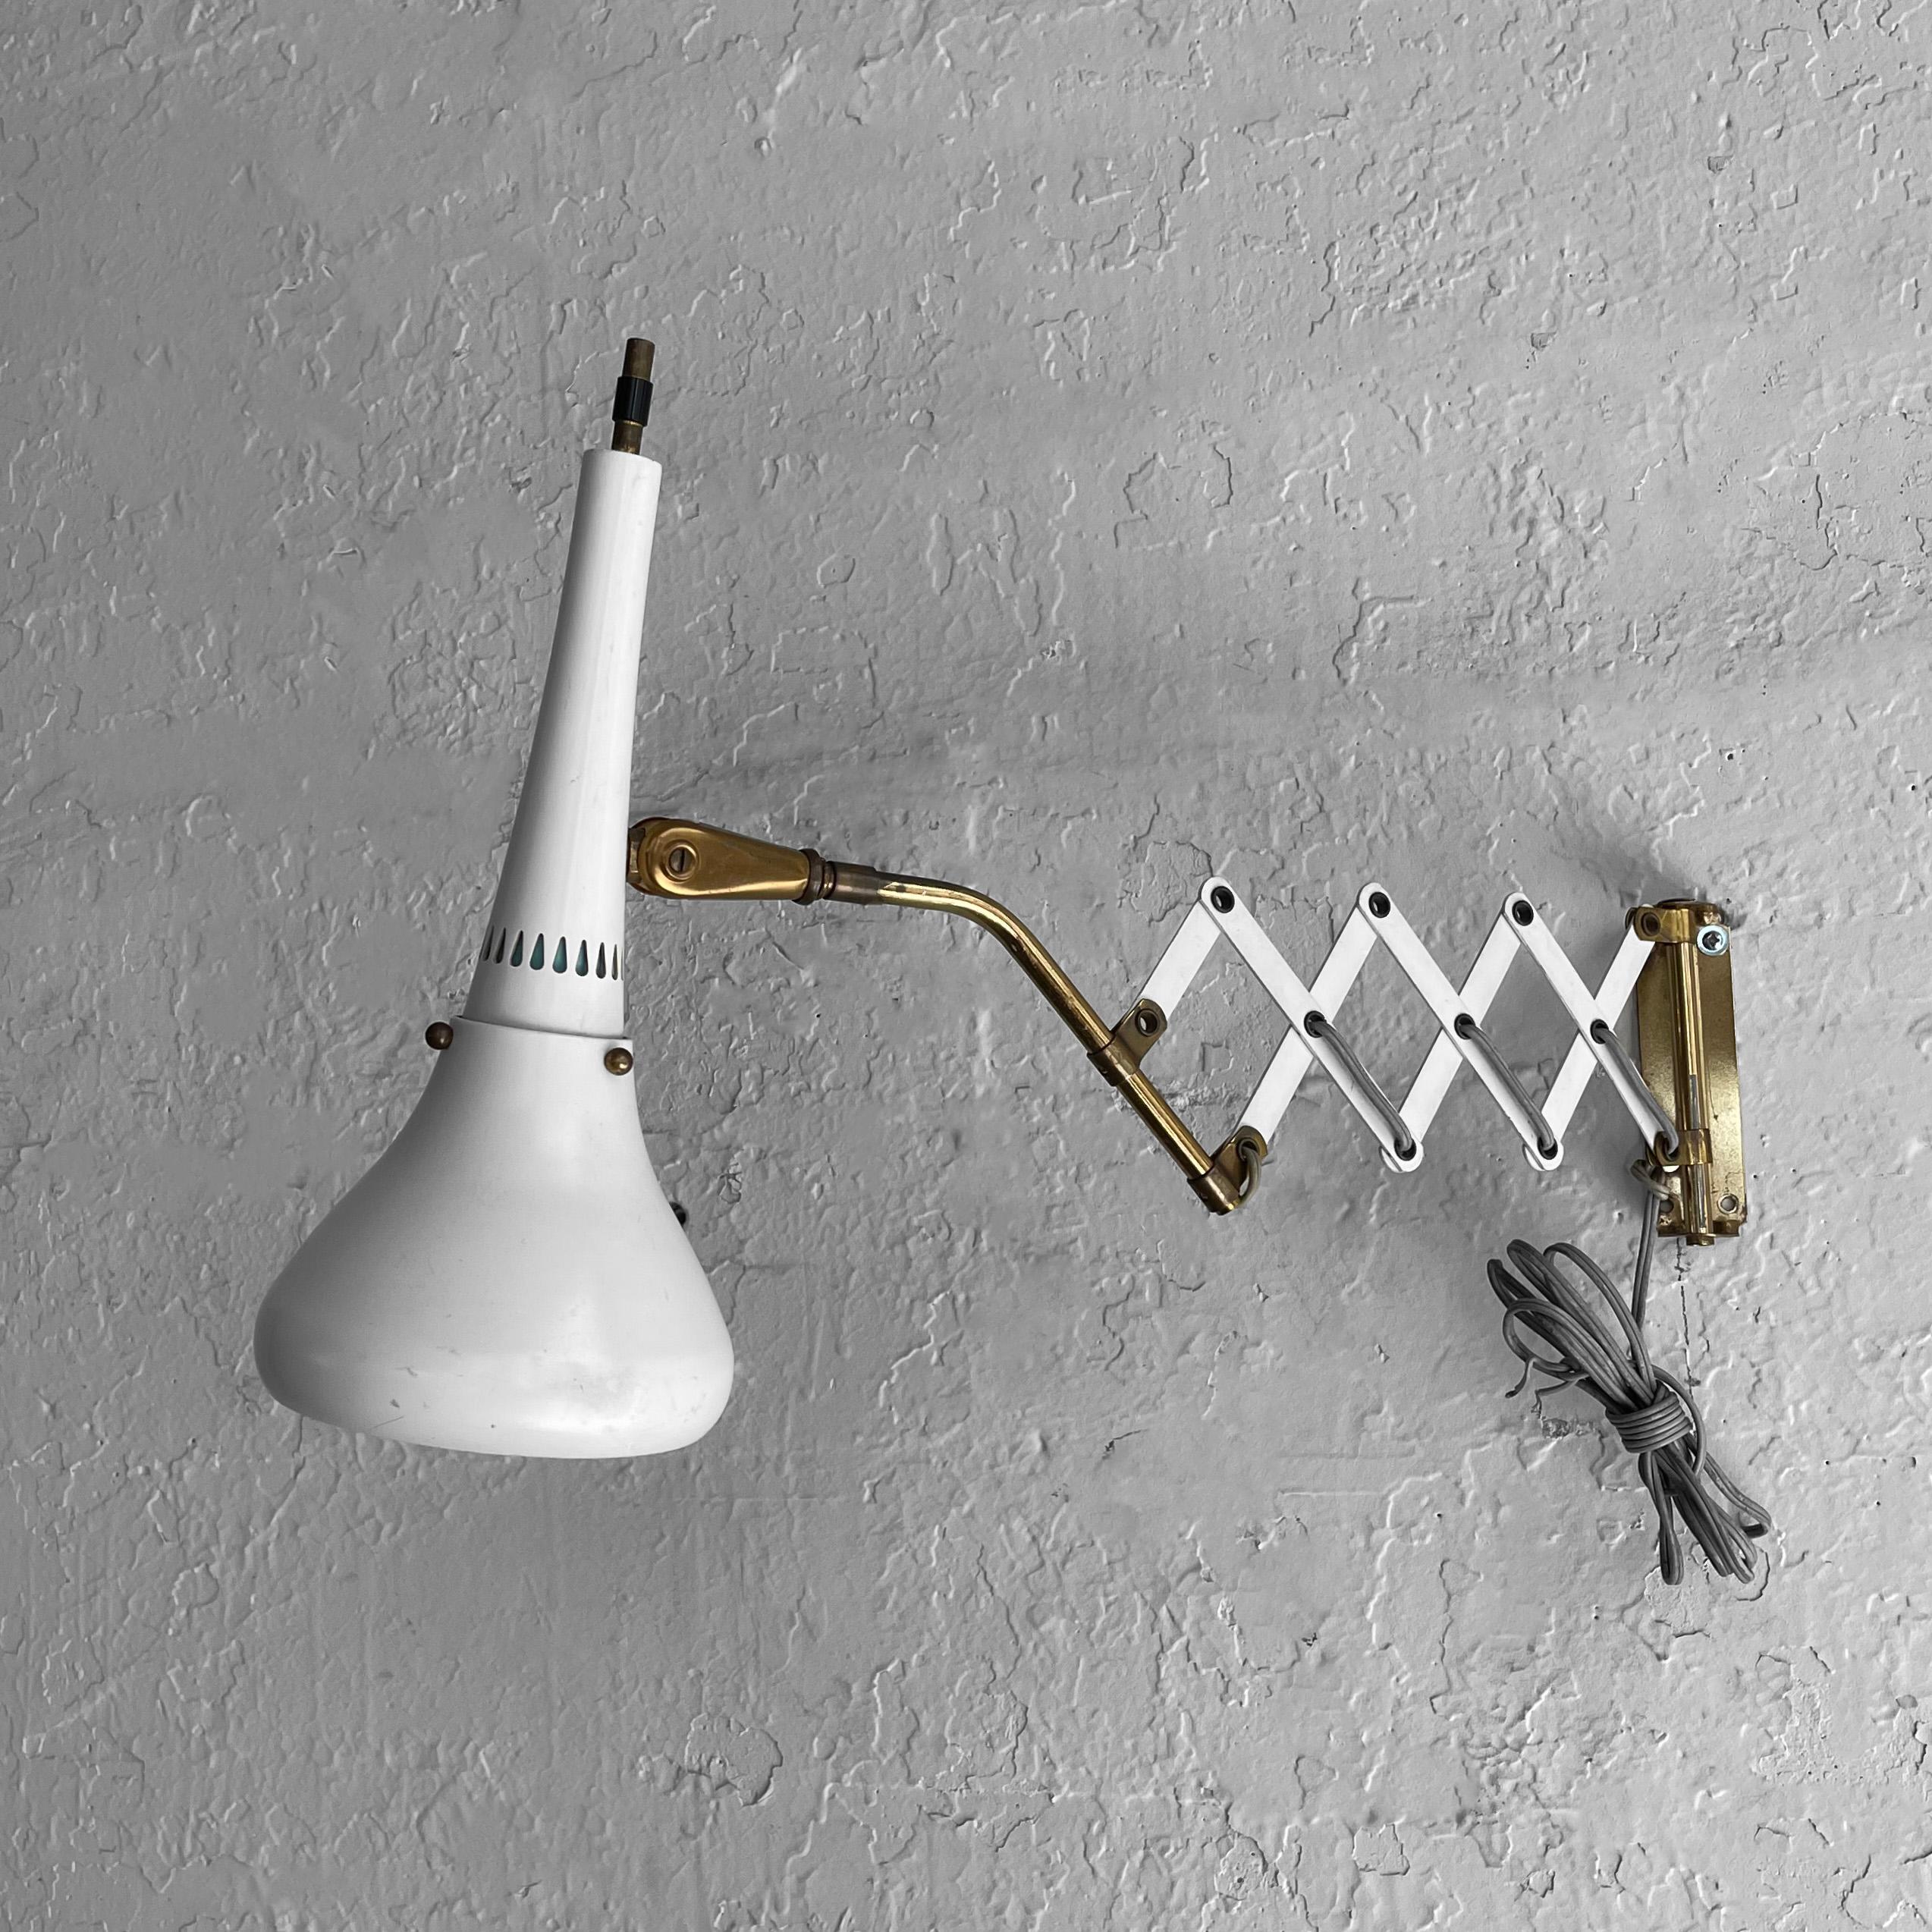 Mid-Century Modern, task lamp, wall sconce by Gerald Thurston for Lightolier features an adjustable, 5.5 inch diameter, painted metal shade on a brass stem and wall plate with an accordian, scissor arm that adjusts from 13 - 24 inches depth